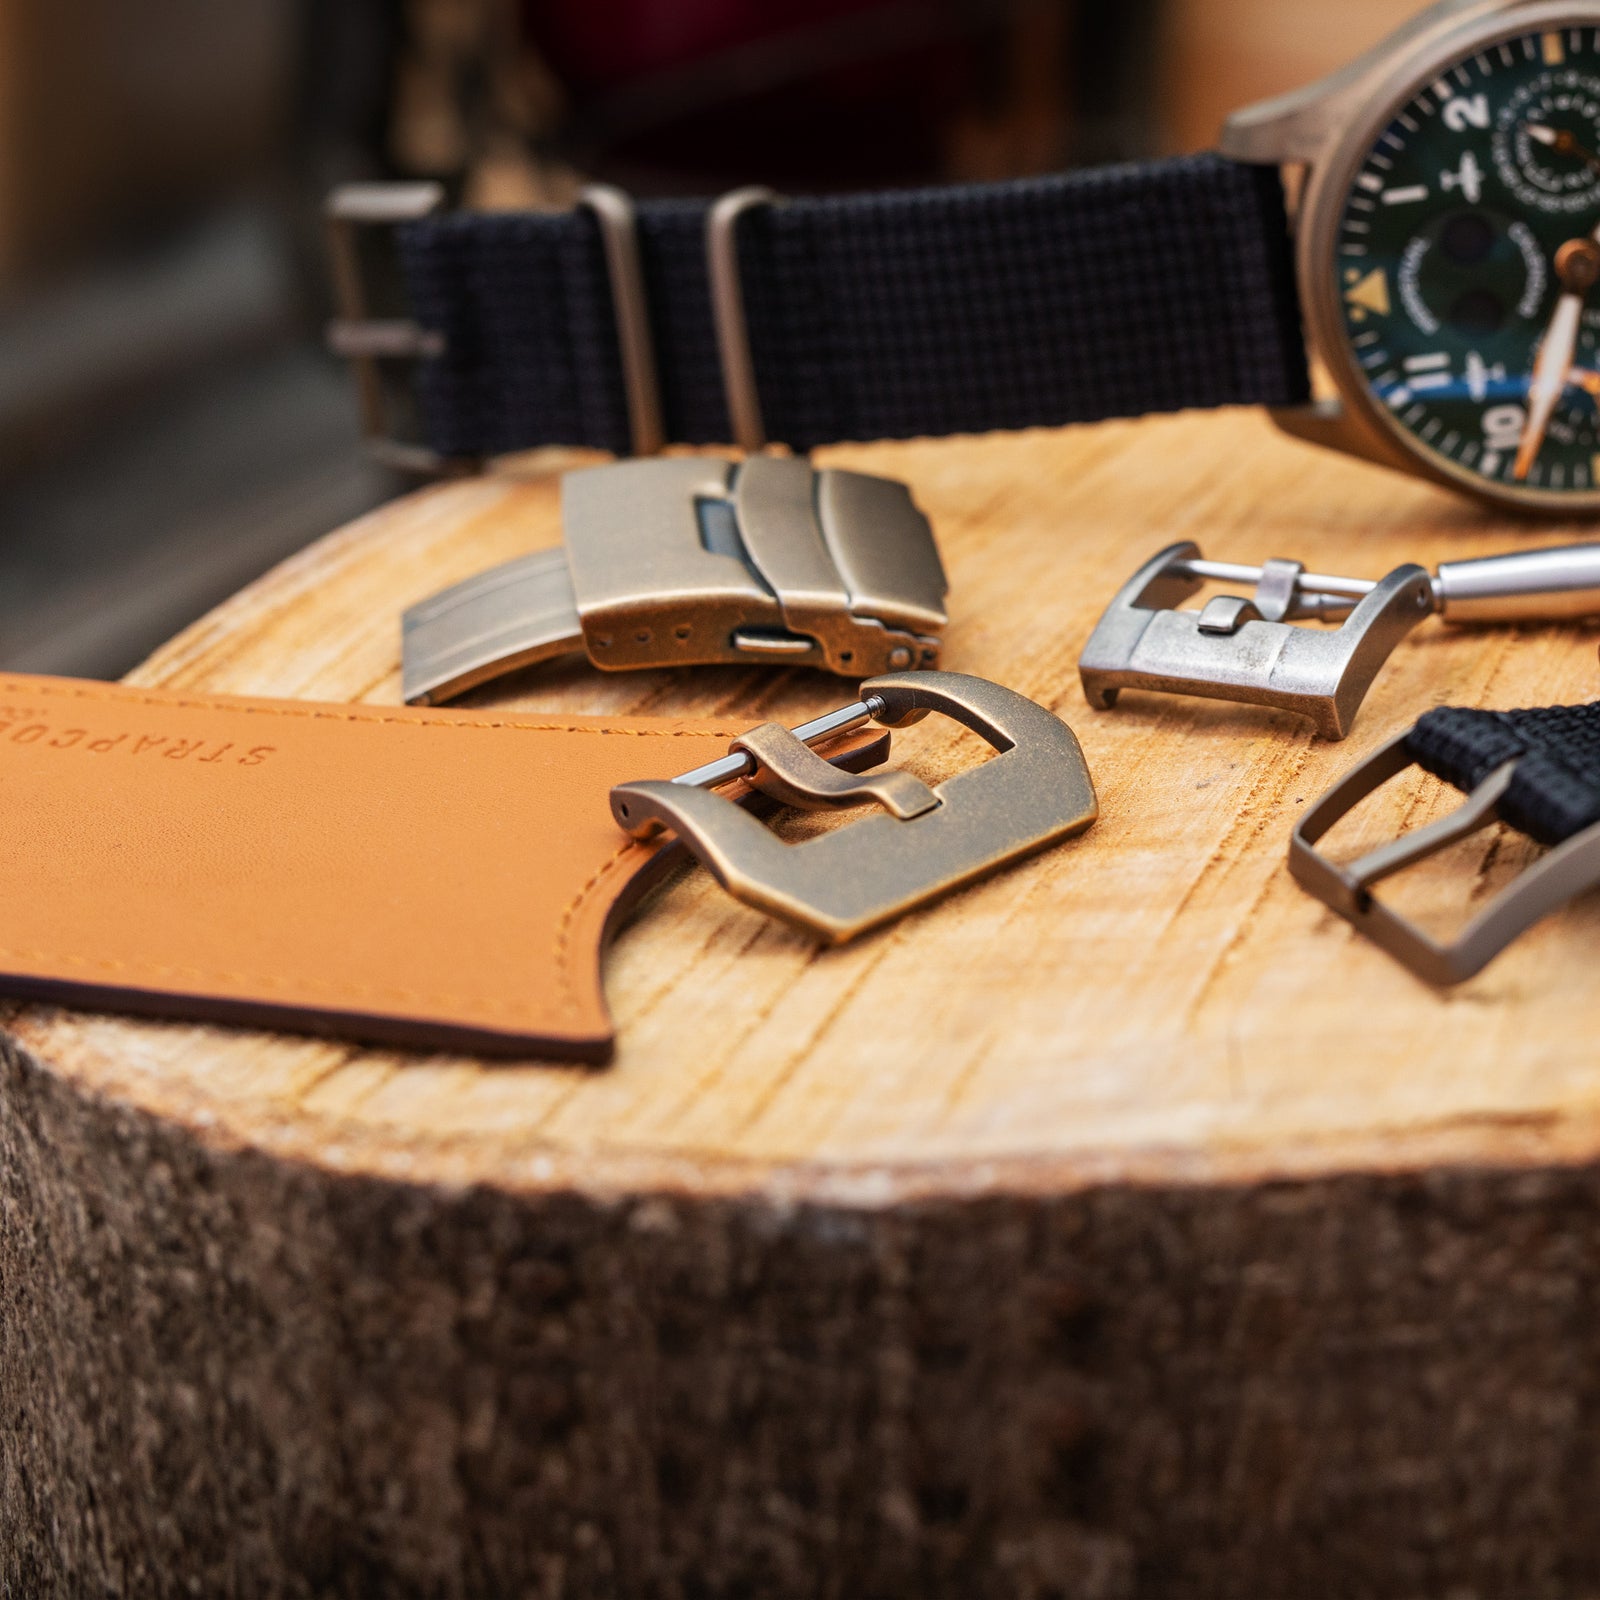 The Complete Guide to watch bands & watch straps